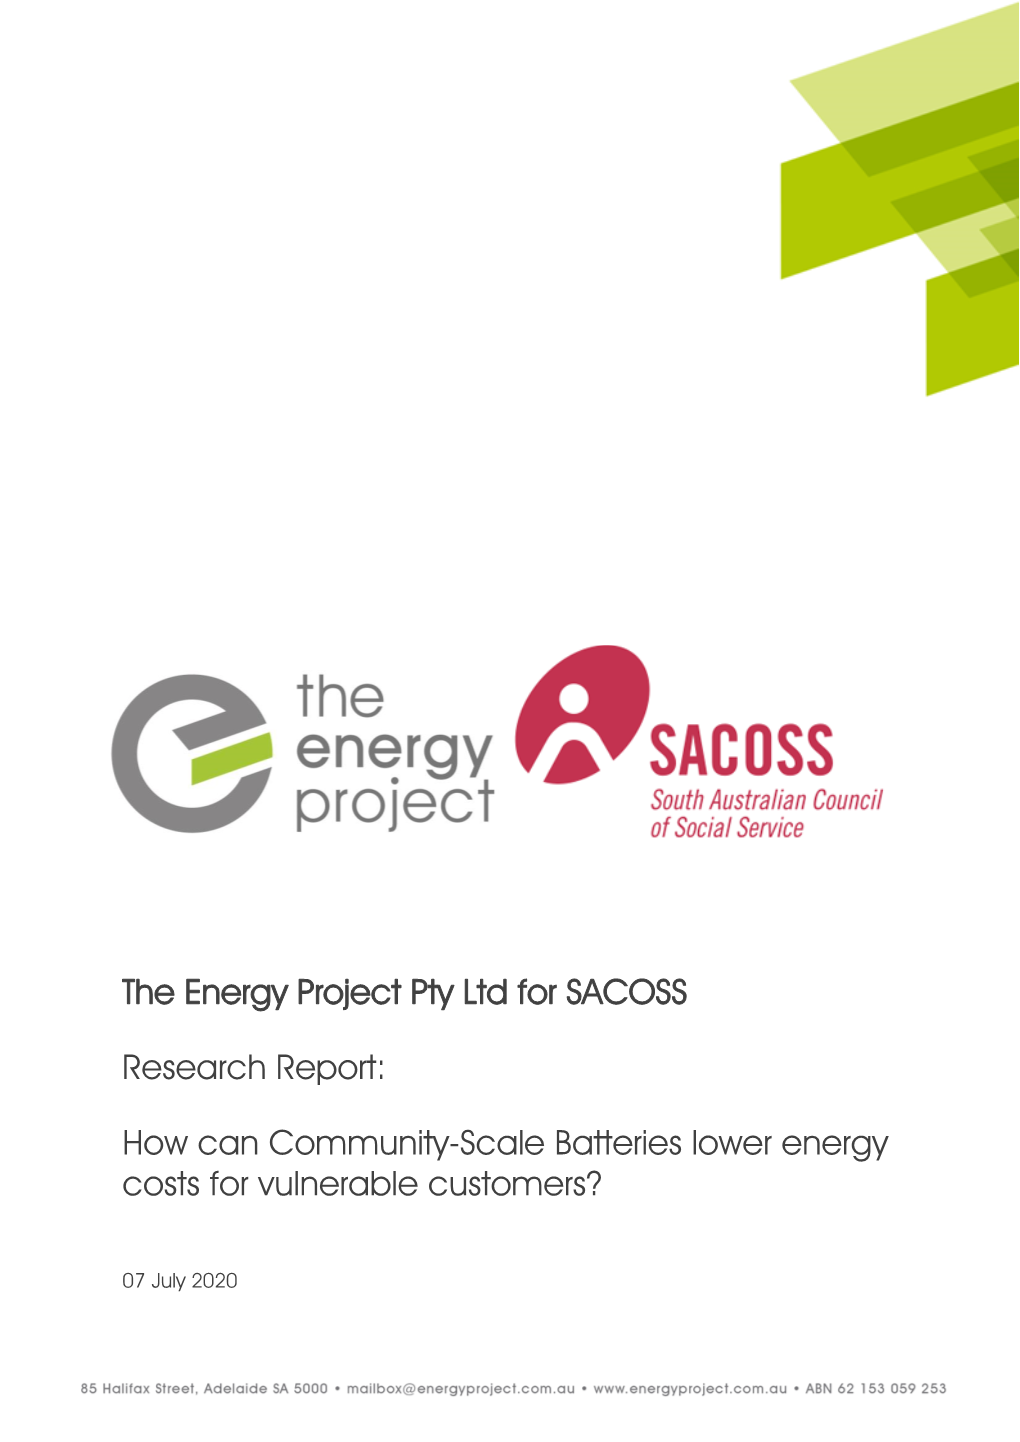 SACOSS Community Battery Research Report July 2020